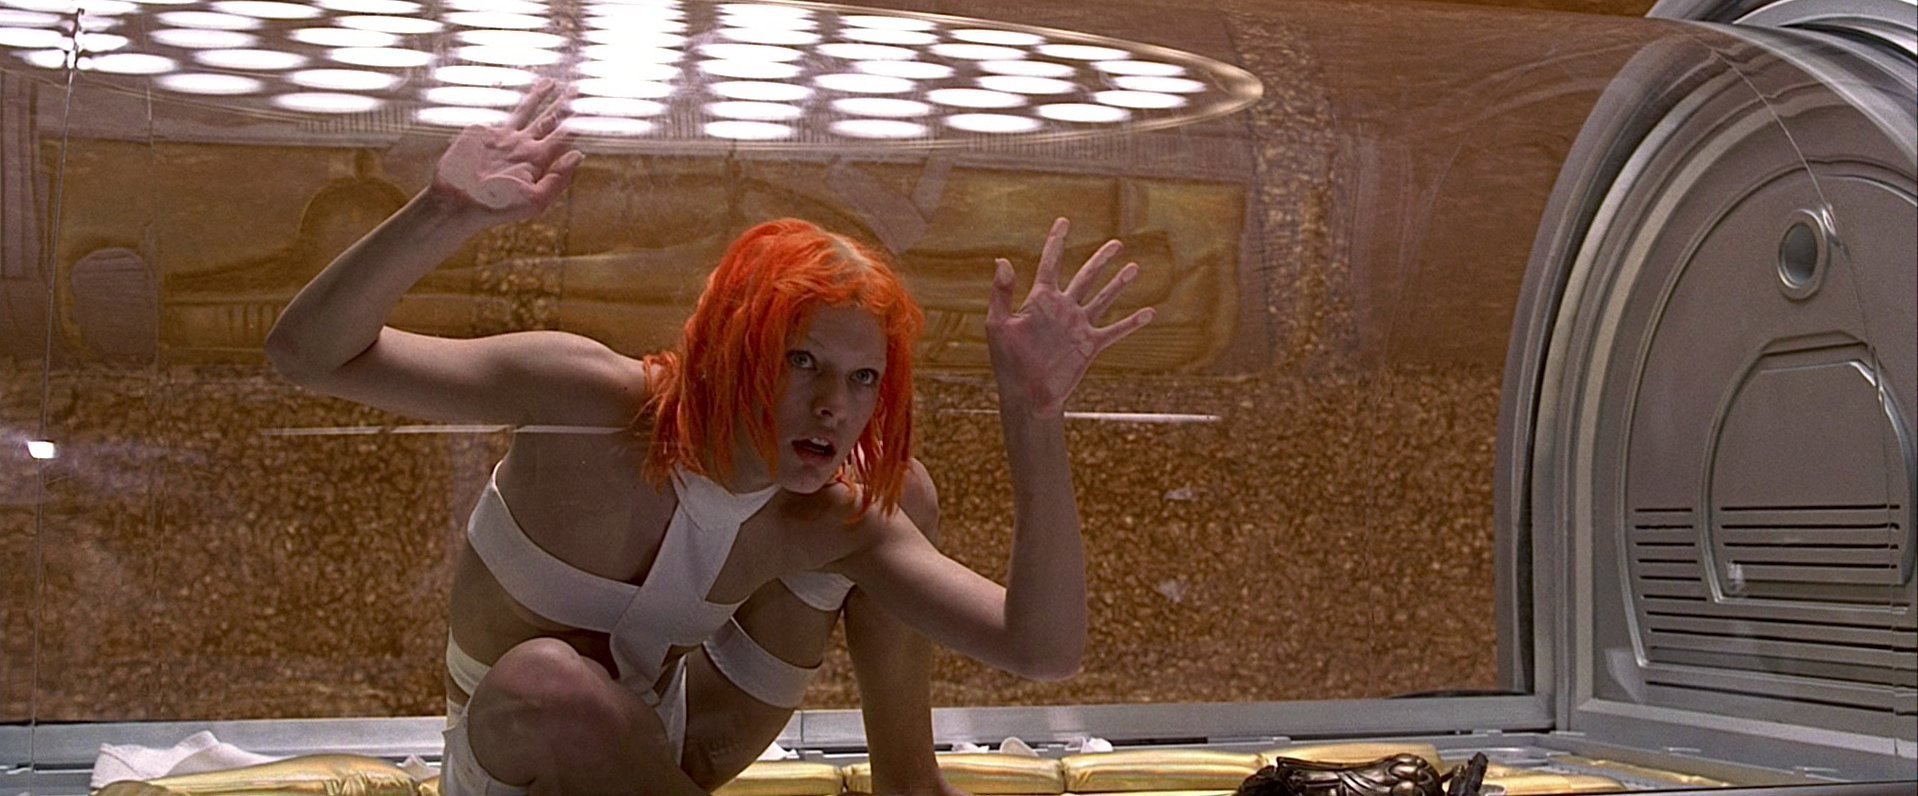 Image of The Fifth Element for fans of The Fifth Element. 